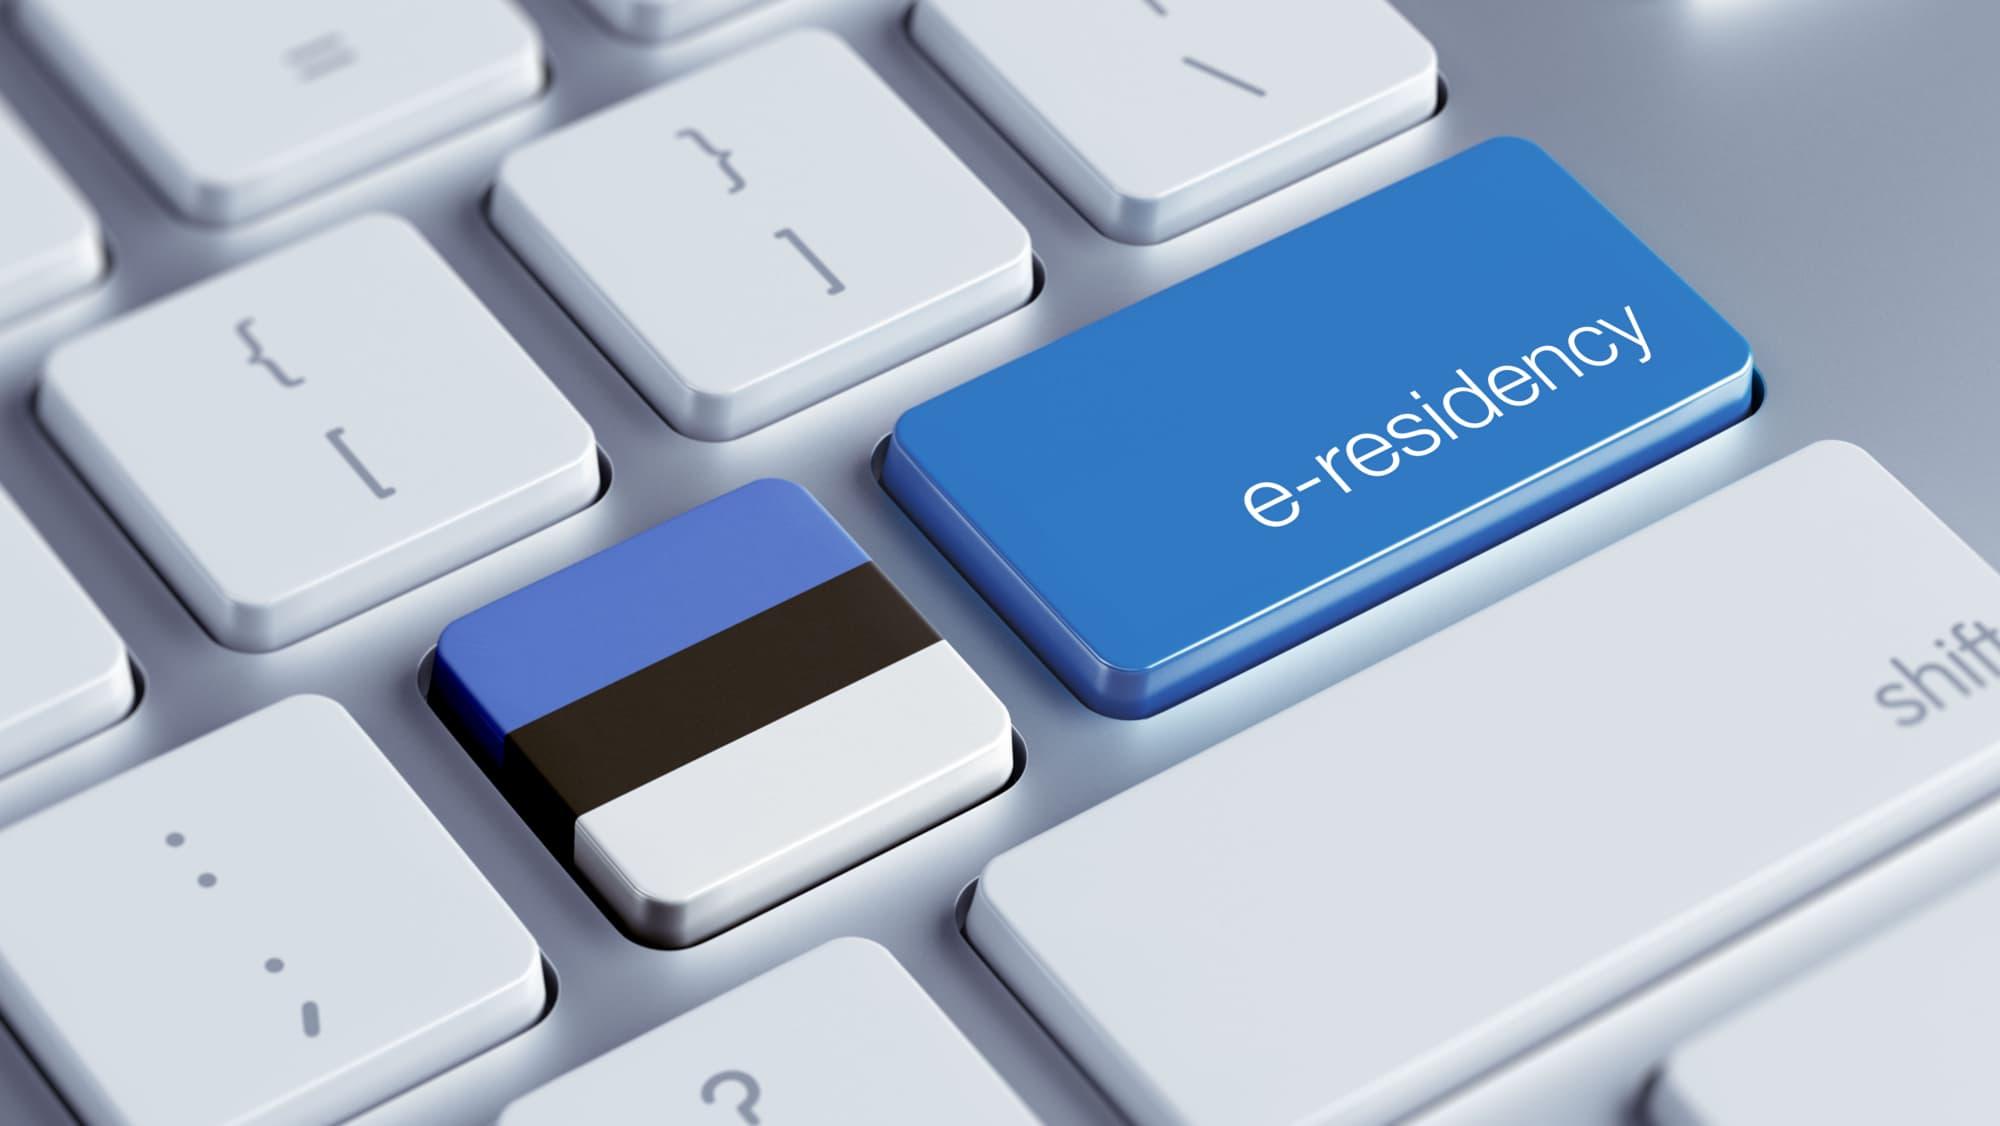 How to Open Company in Estonia with e-Residency [Full Guide]